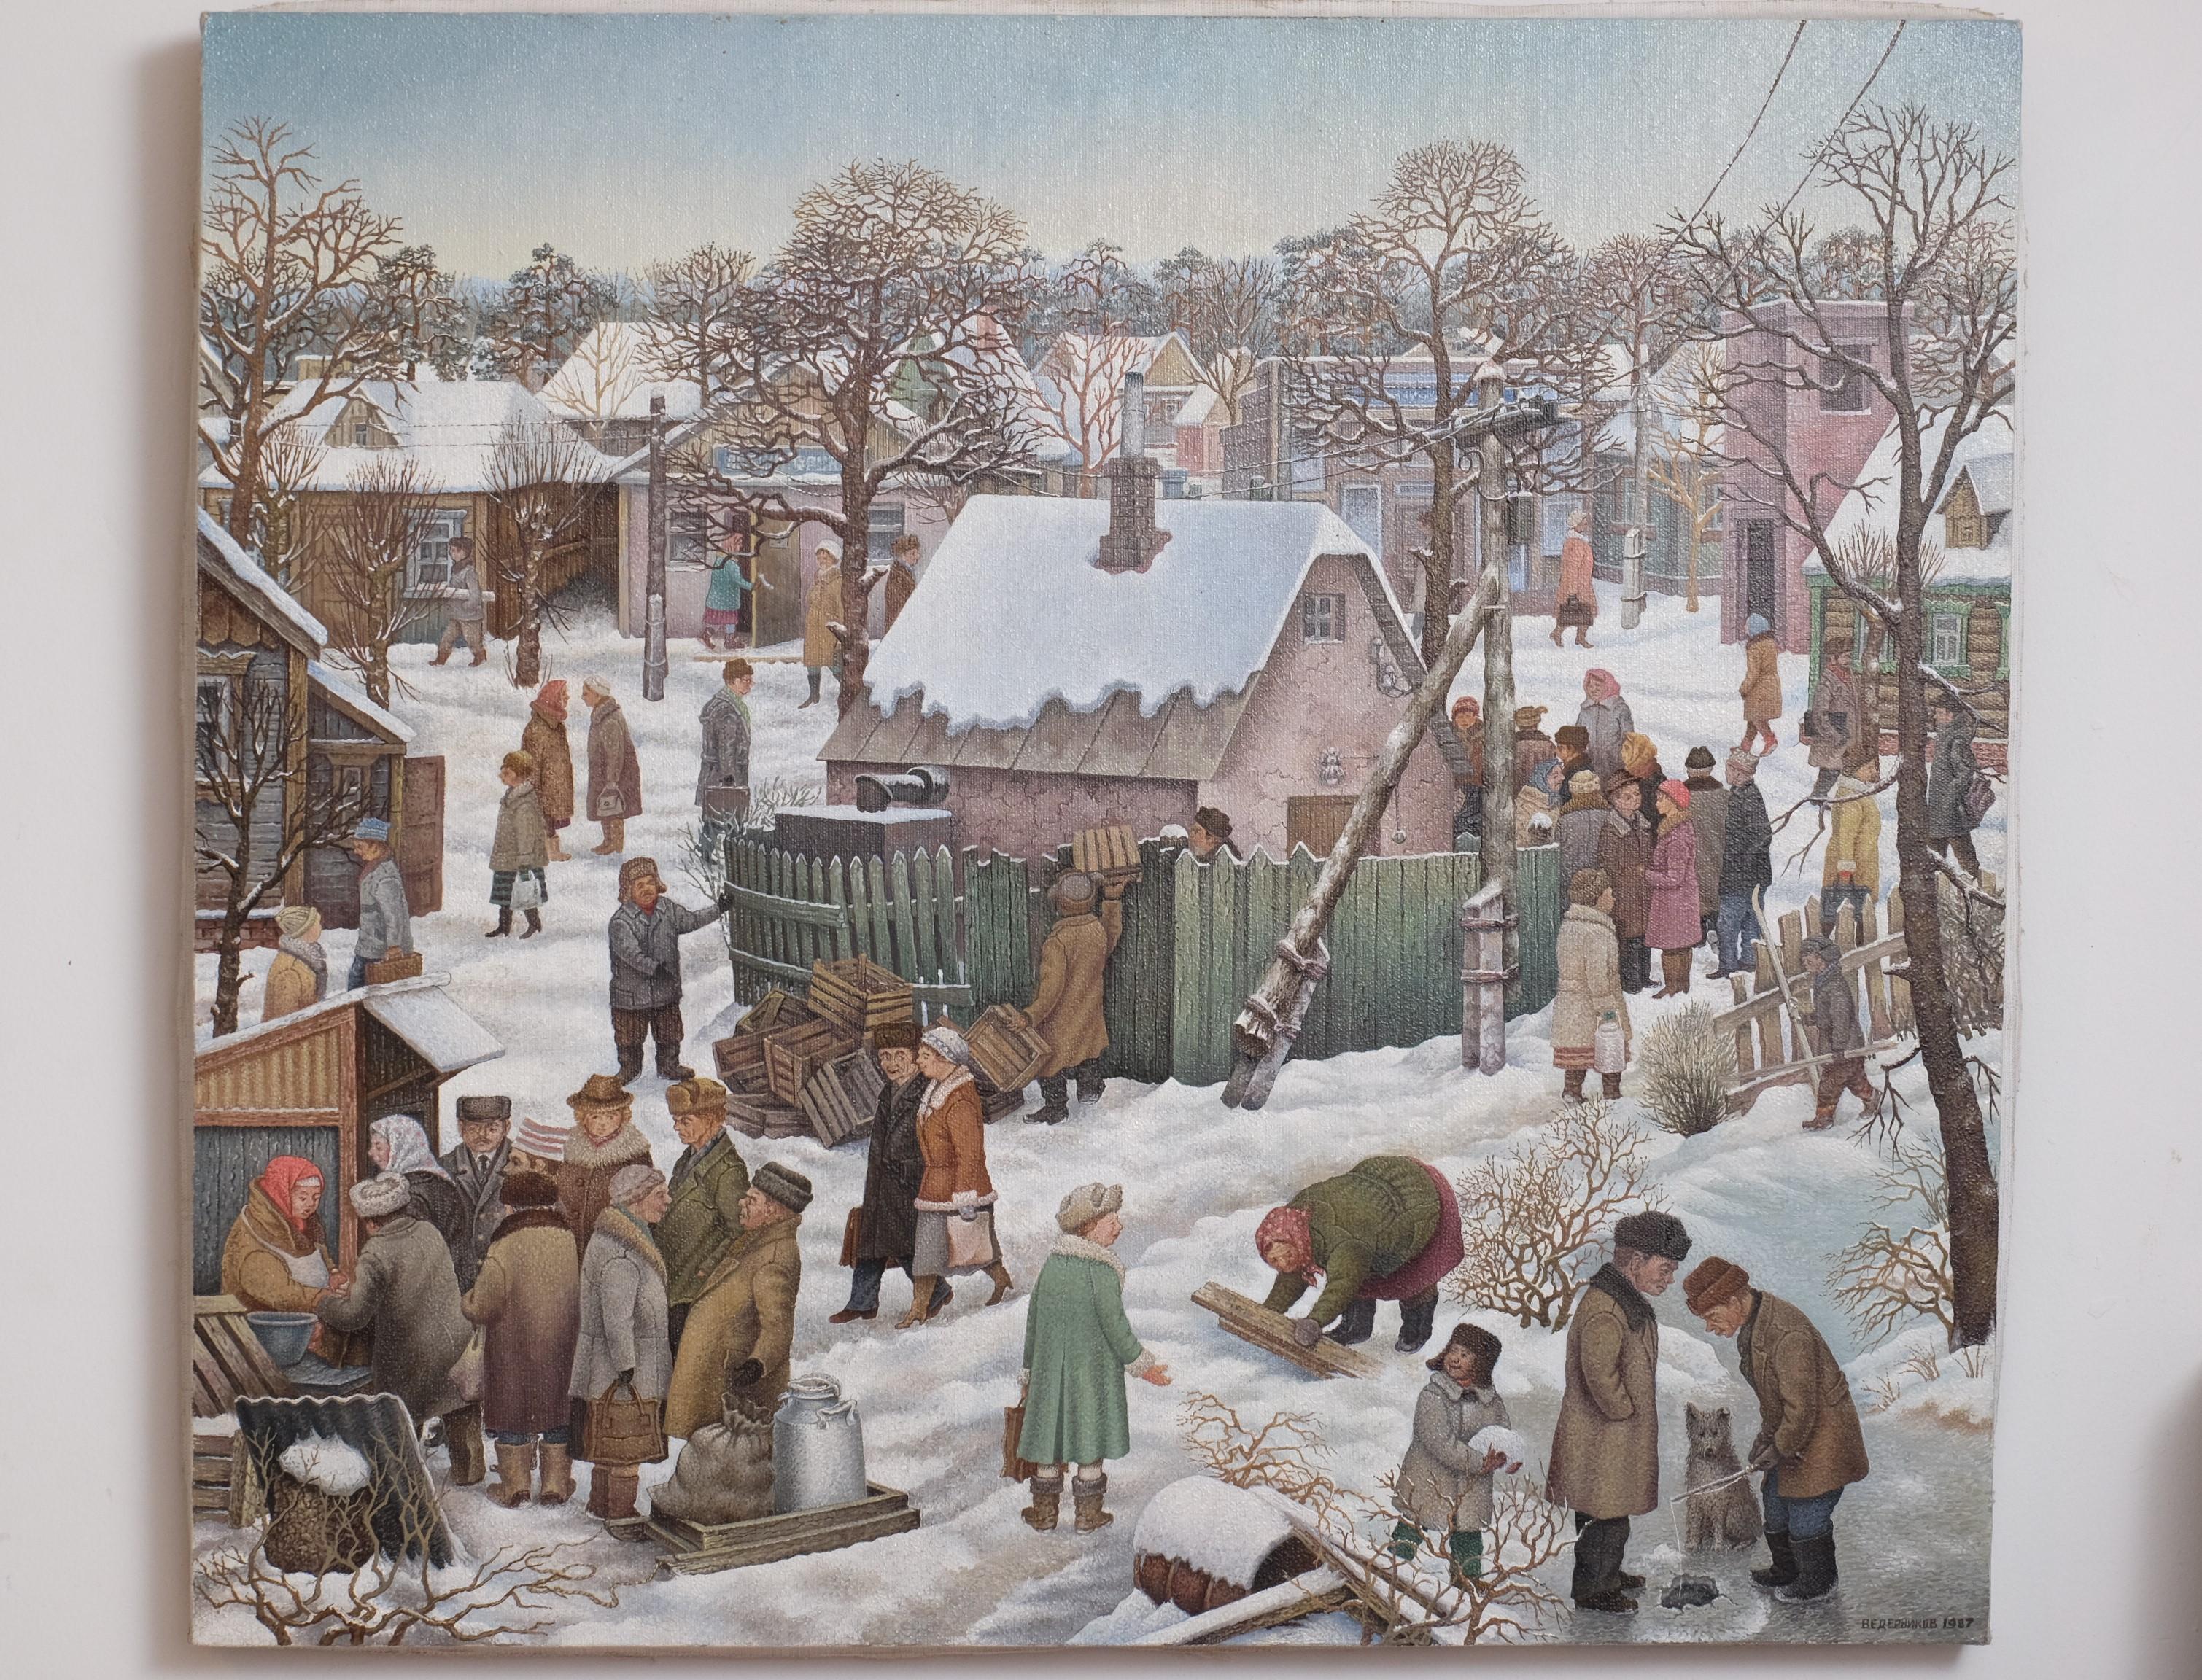 Oil Painting on canvas by Julij Anatolevic VEDERNIKOV. Signed and dated (1987).

Rich depiction of a wintry village scenery in Russia. Market hustle and bustle, women collecting firewood, men fishing,... 
